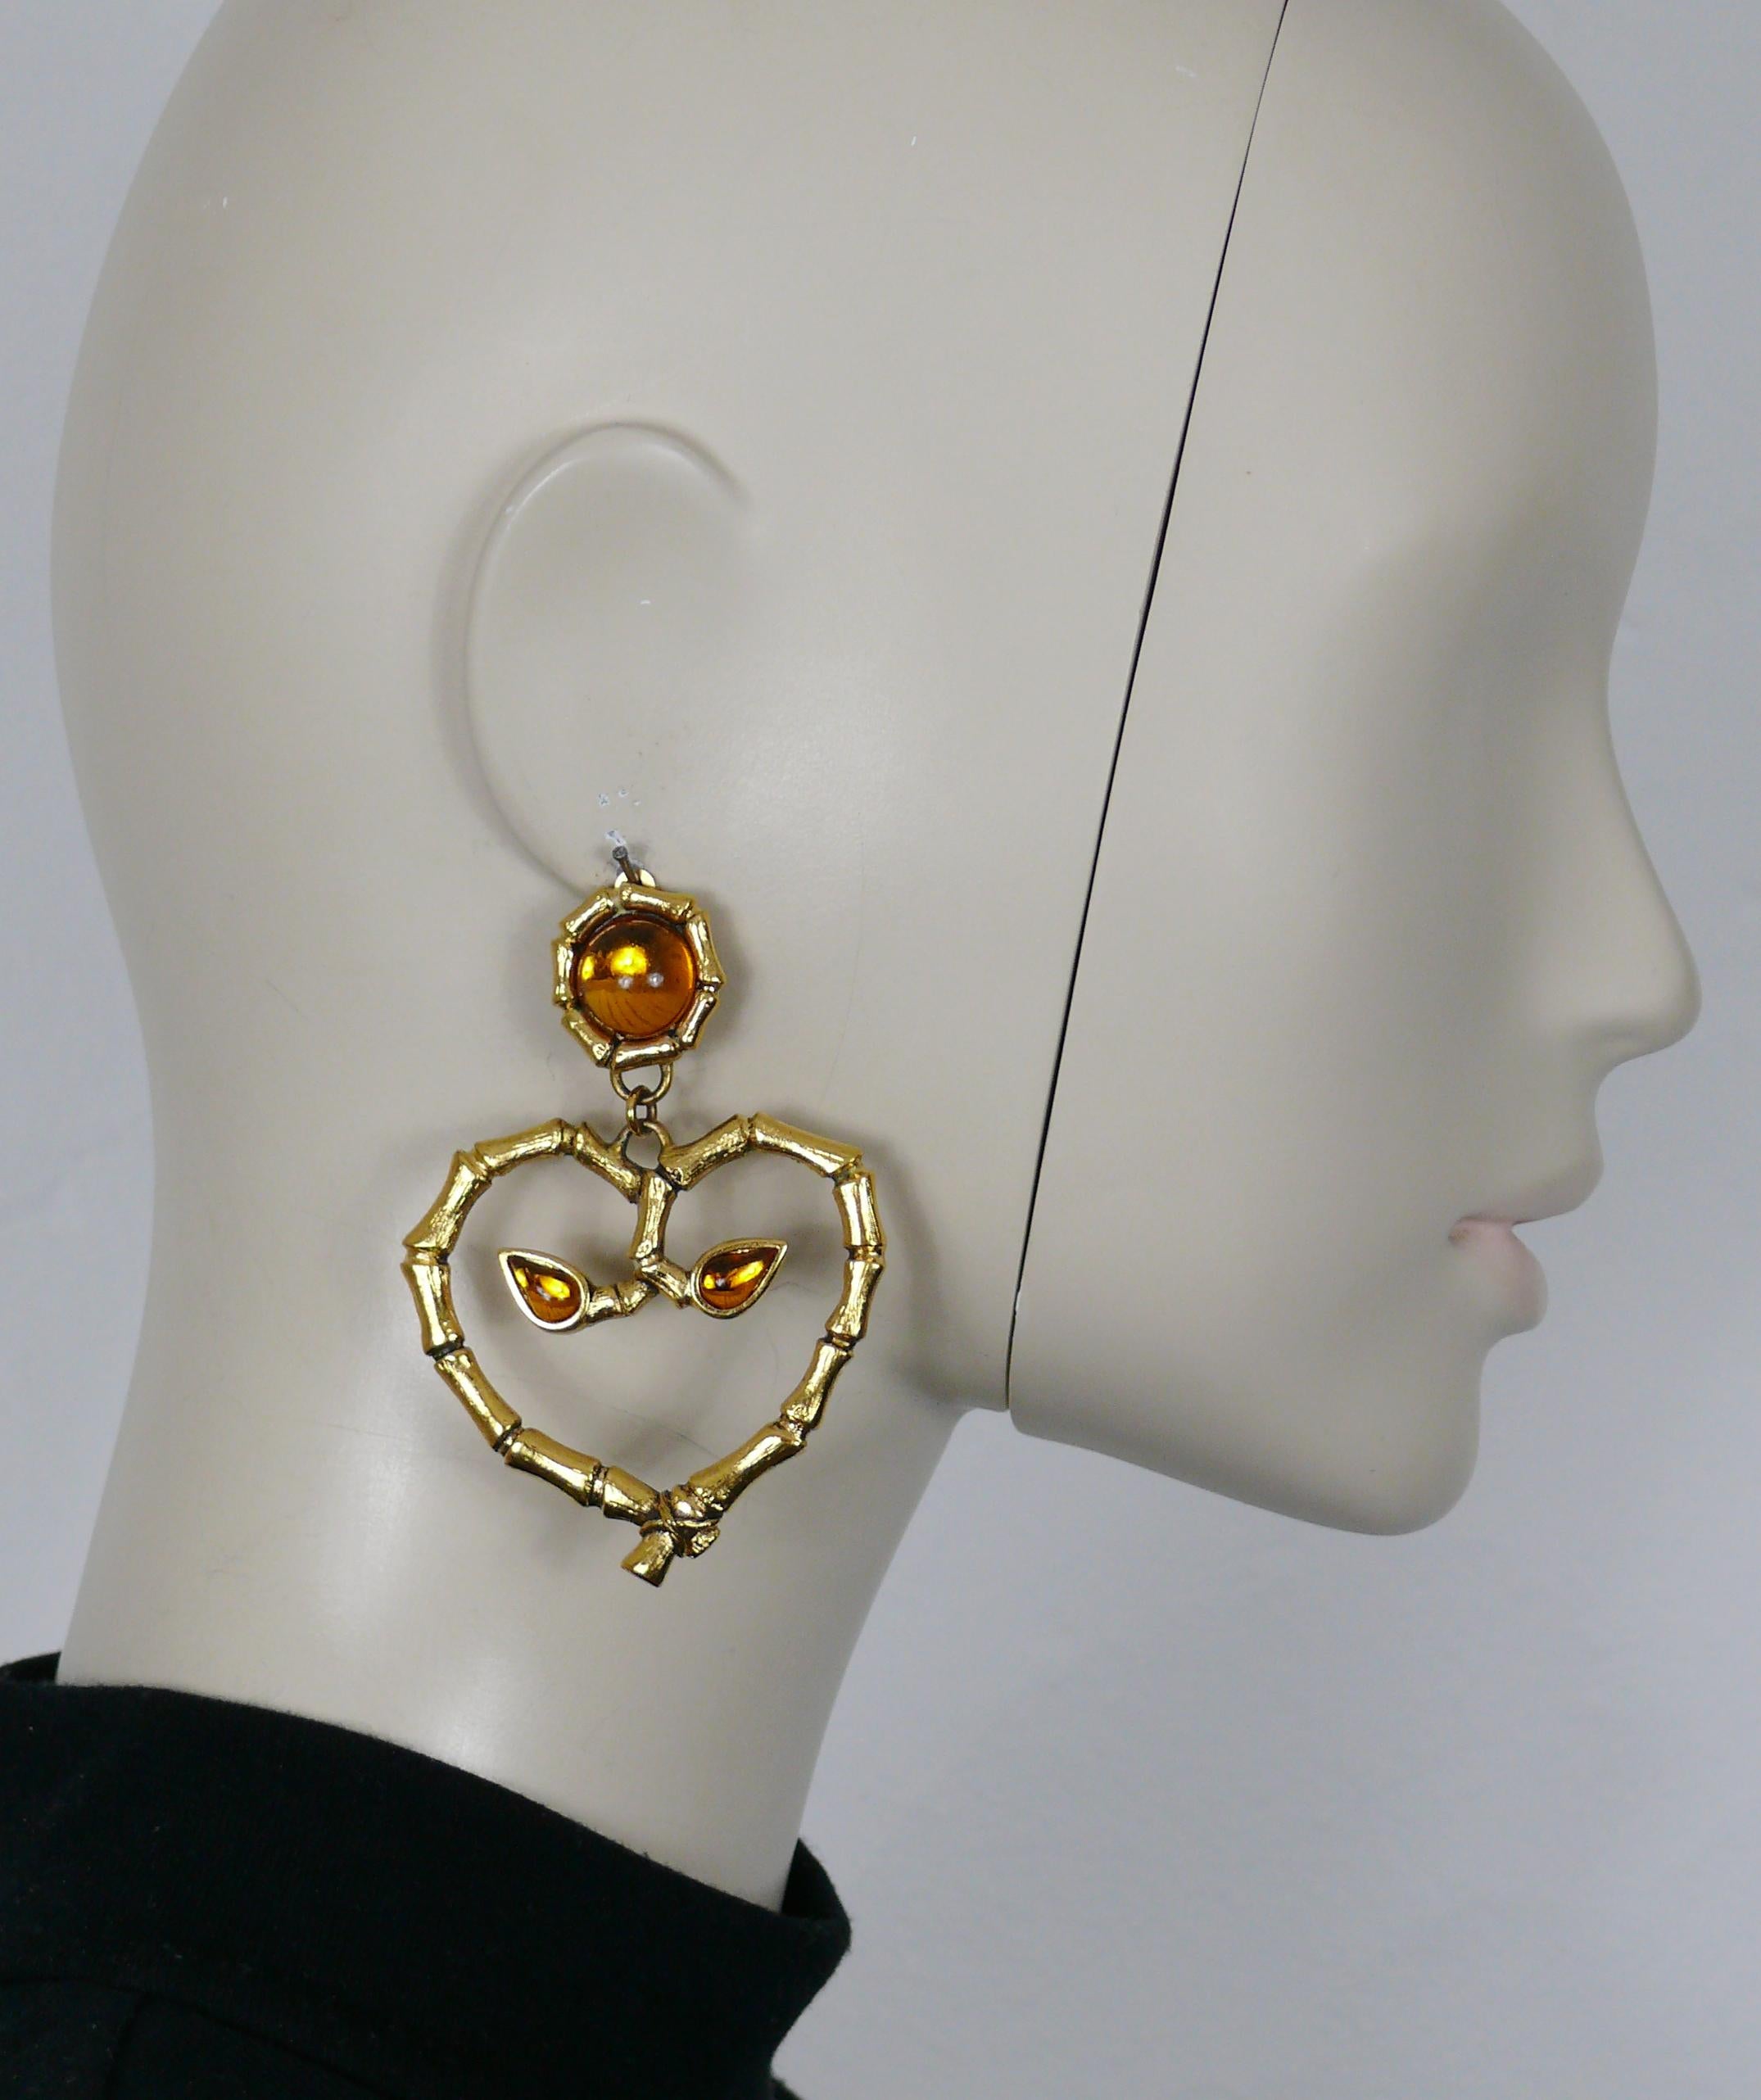 ROCHAS vintage antiqued gold tone heart shaped dangling earrings (clip-on) featuring a bamboo design with orange glass cabochons embellishement.

Embossed ROCHAS PARIS Made in France.

Indicative measurements : max. height approx. 7.7 cm (3.03